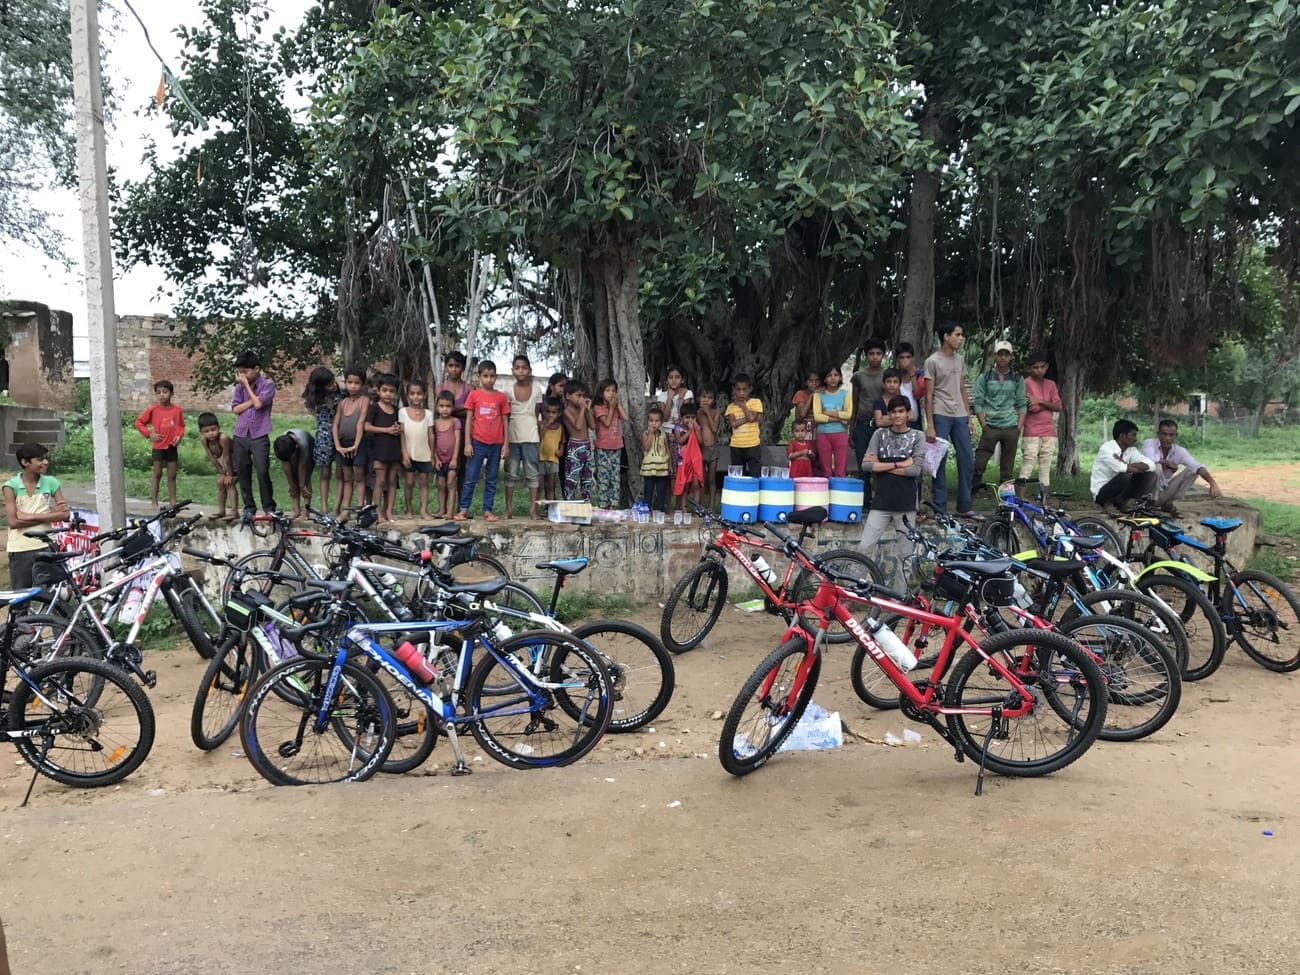 Children gather to look at the foreigners who arrived in their village during the cycle tour